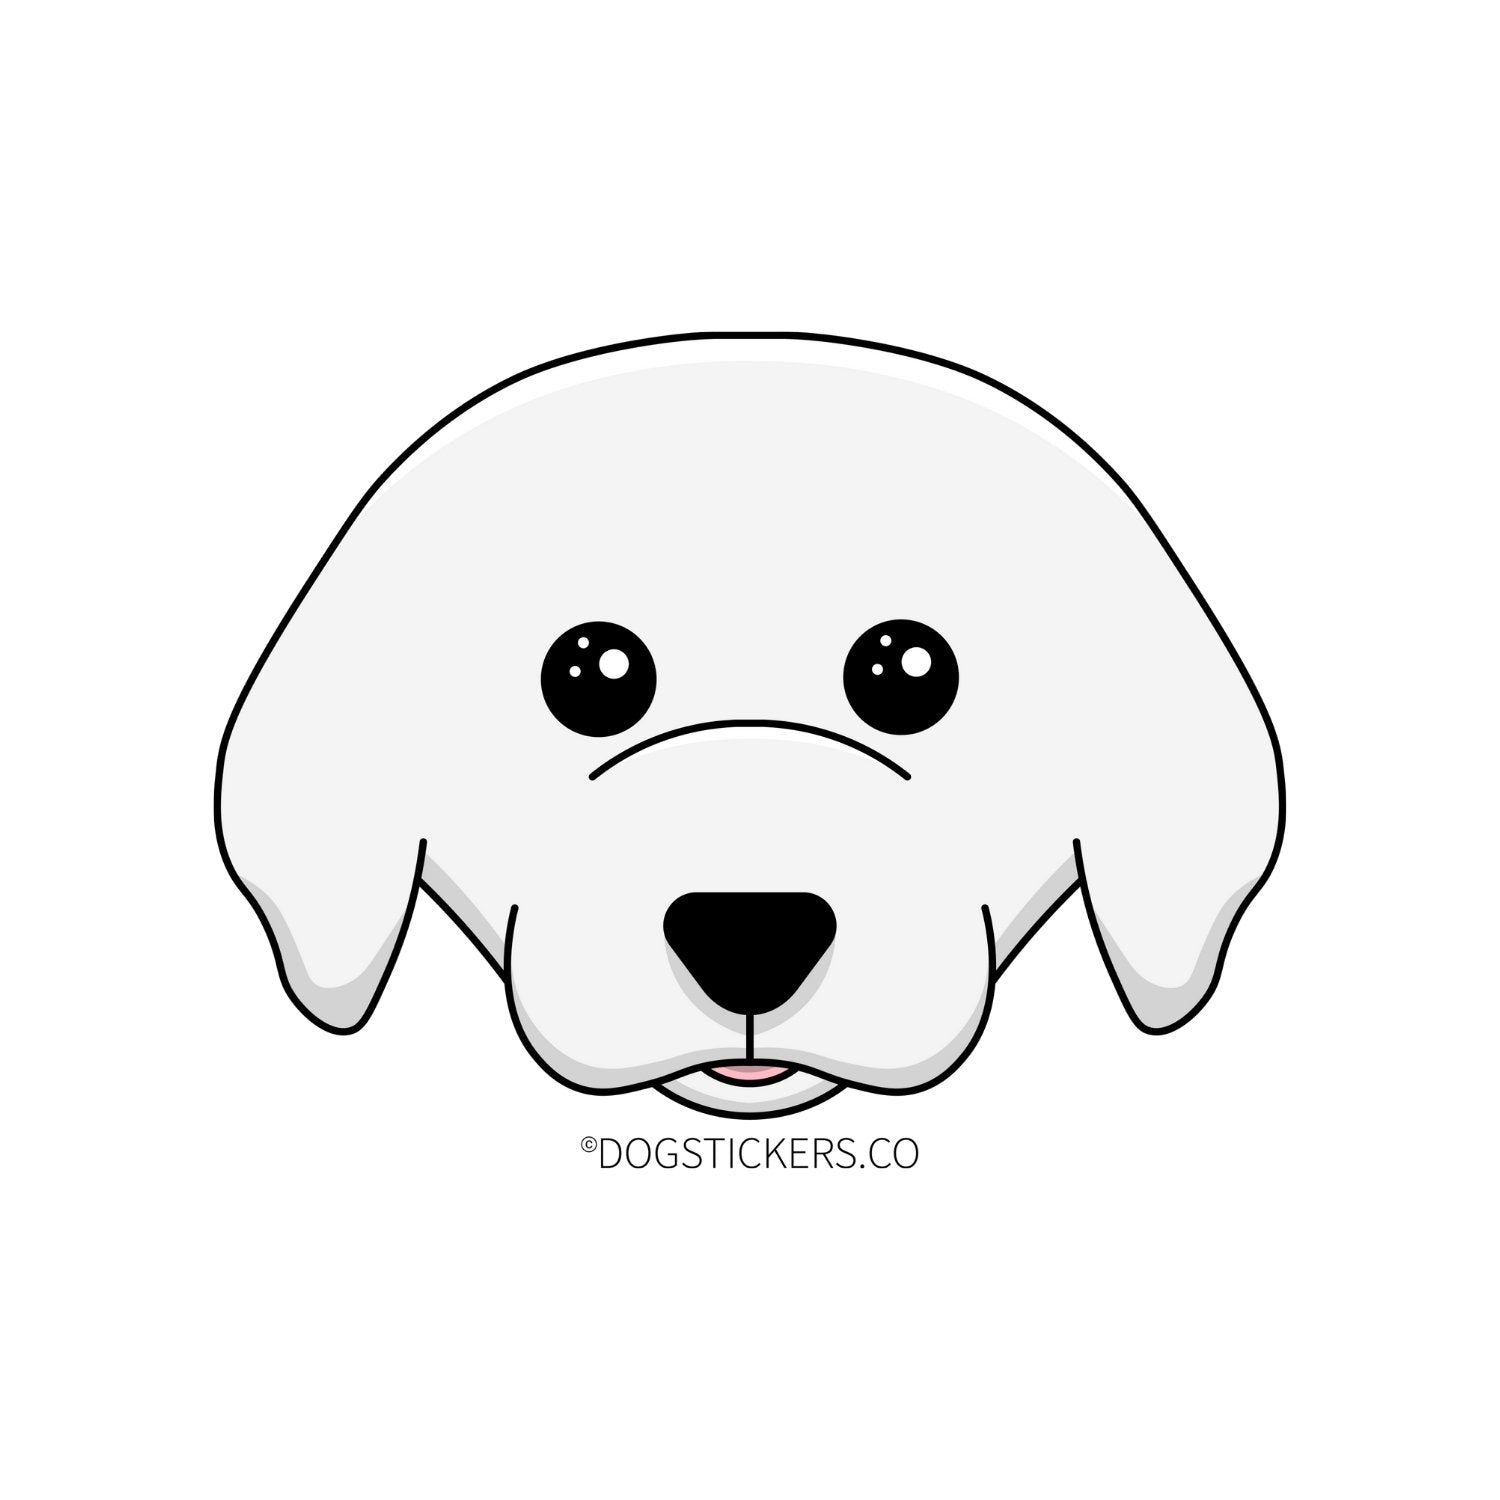 Great Pyrenees Sticker - Dogstickers.co